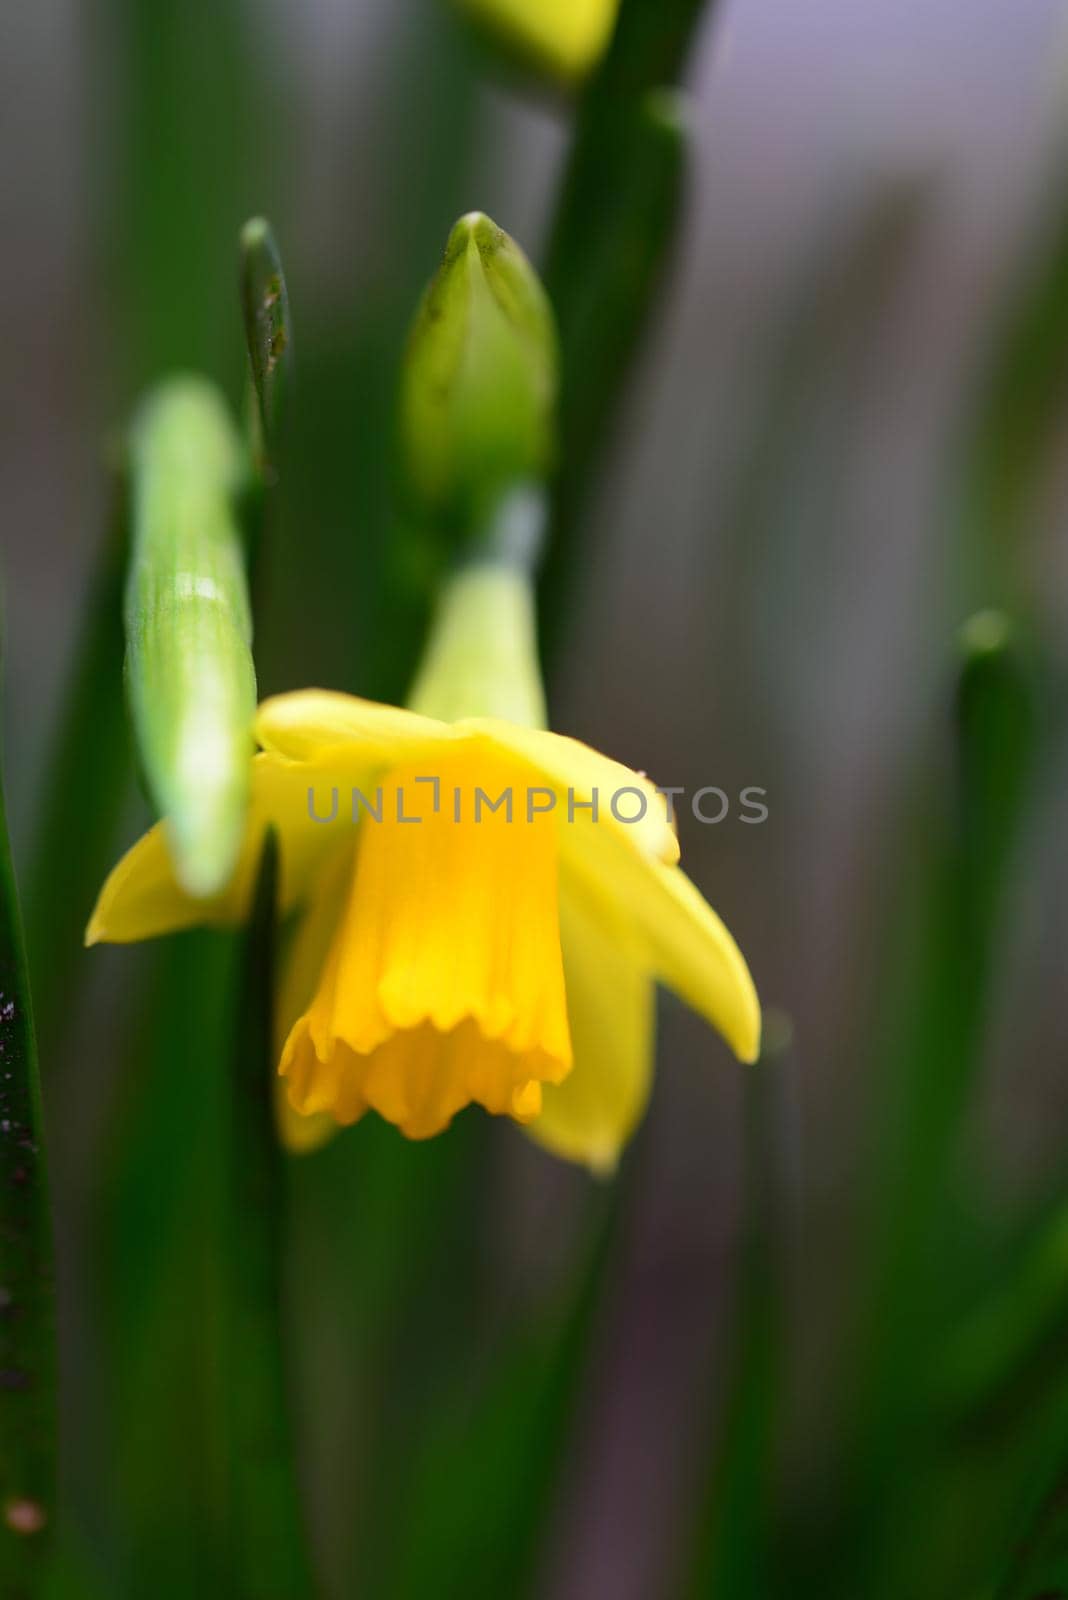 Yellow daffodil as a close-up against a blurred background